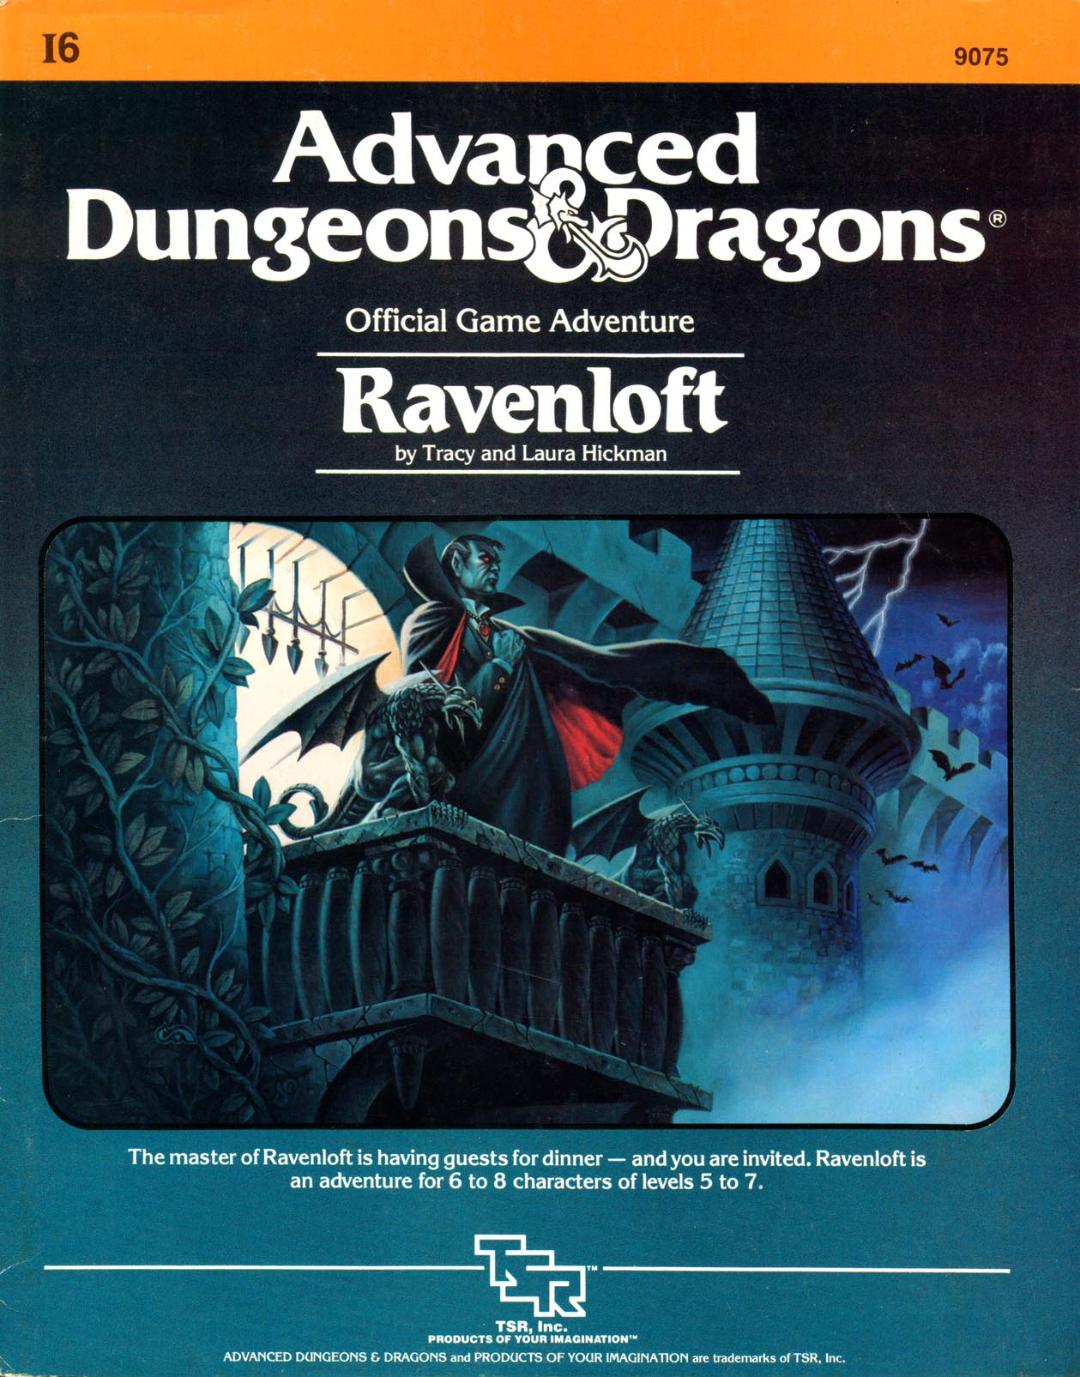 The box art of Castlevania II: Simon's Quest has a striking resemblance to the Advanced Dungeons & Dragons - Ravenloft artwork.